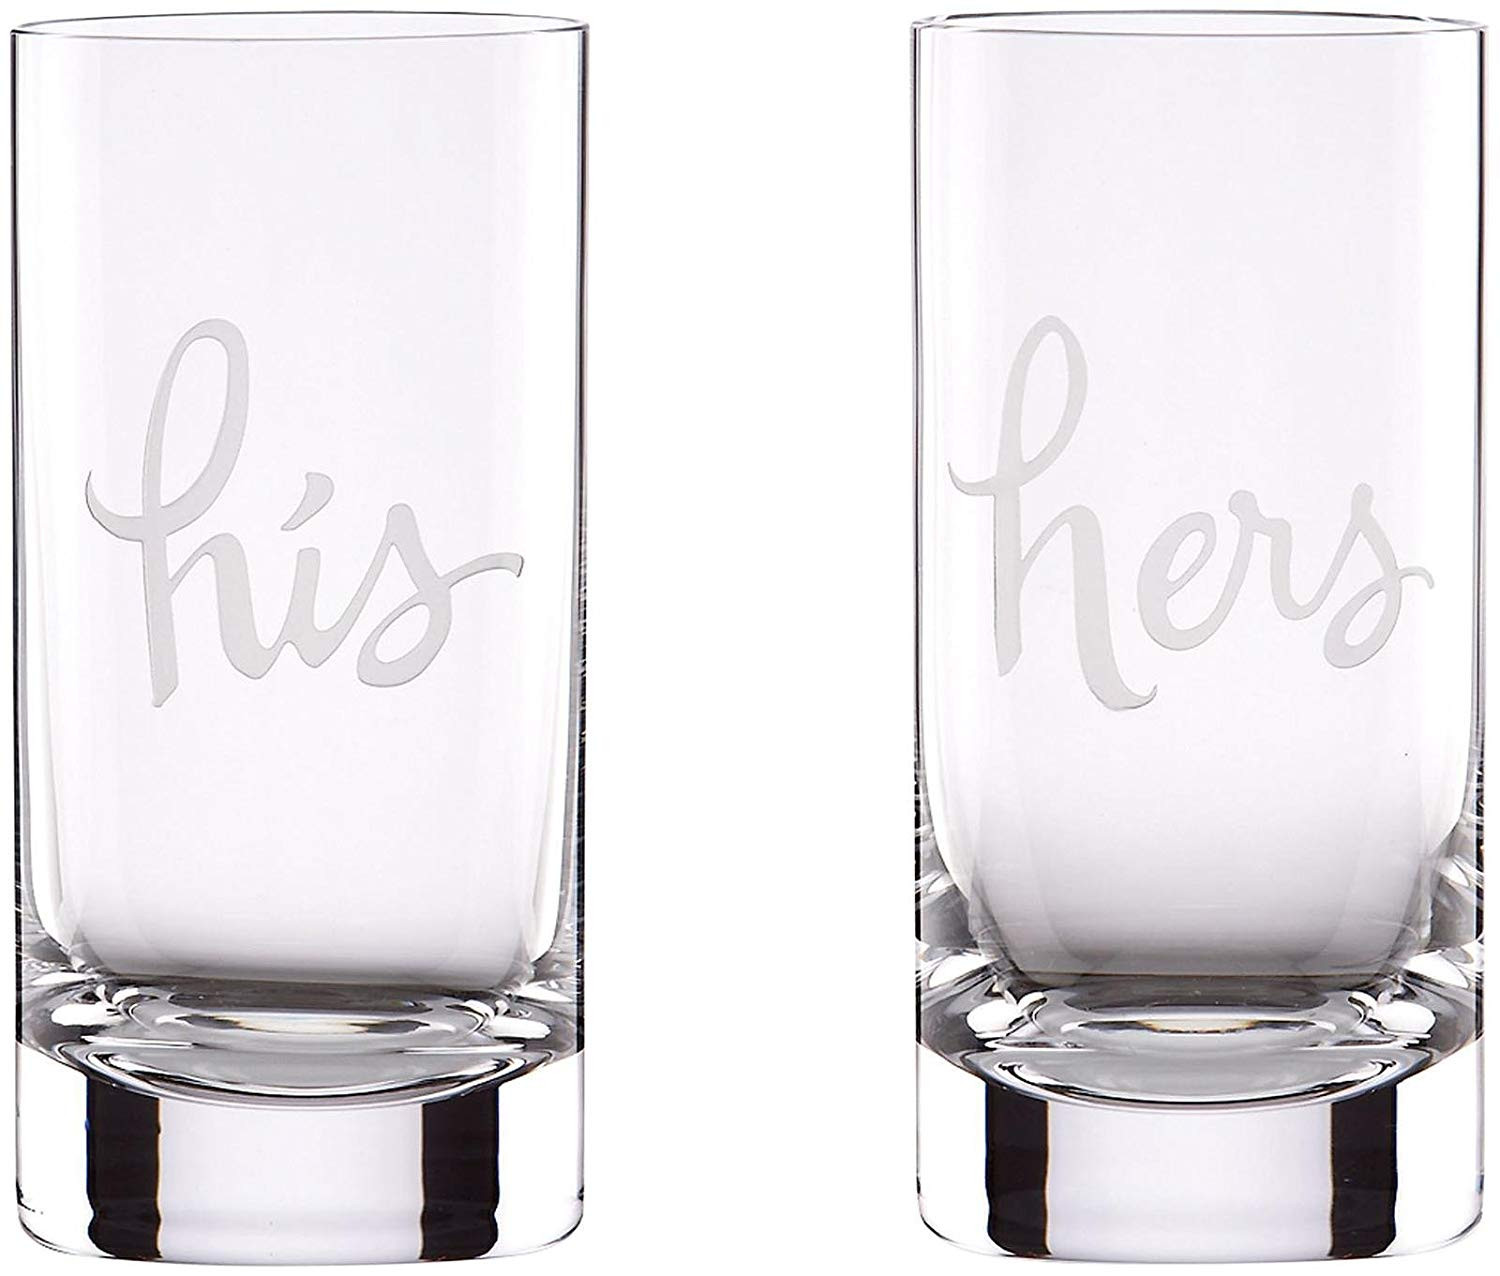 Kate Spade Lenox Vase Of Amazon Com Kate Spade New York Two Of A Kind His and Hers Highball Inside Amazon Com Kate Spade New York Two Of A Kind His and Hers Highball Glass Pair by Lenox Dinnerware Sets Mixed Drinkware Sets